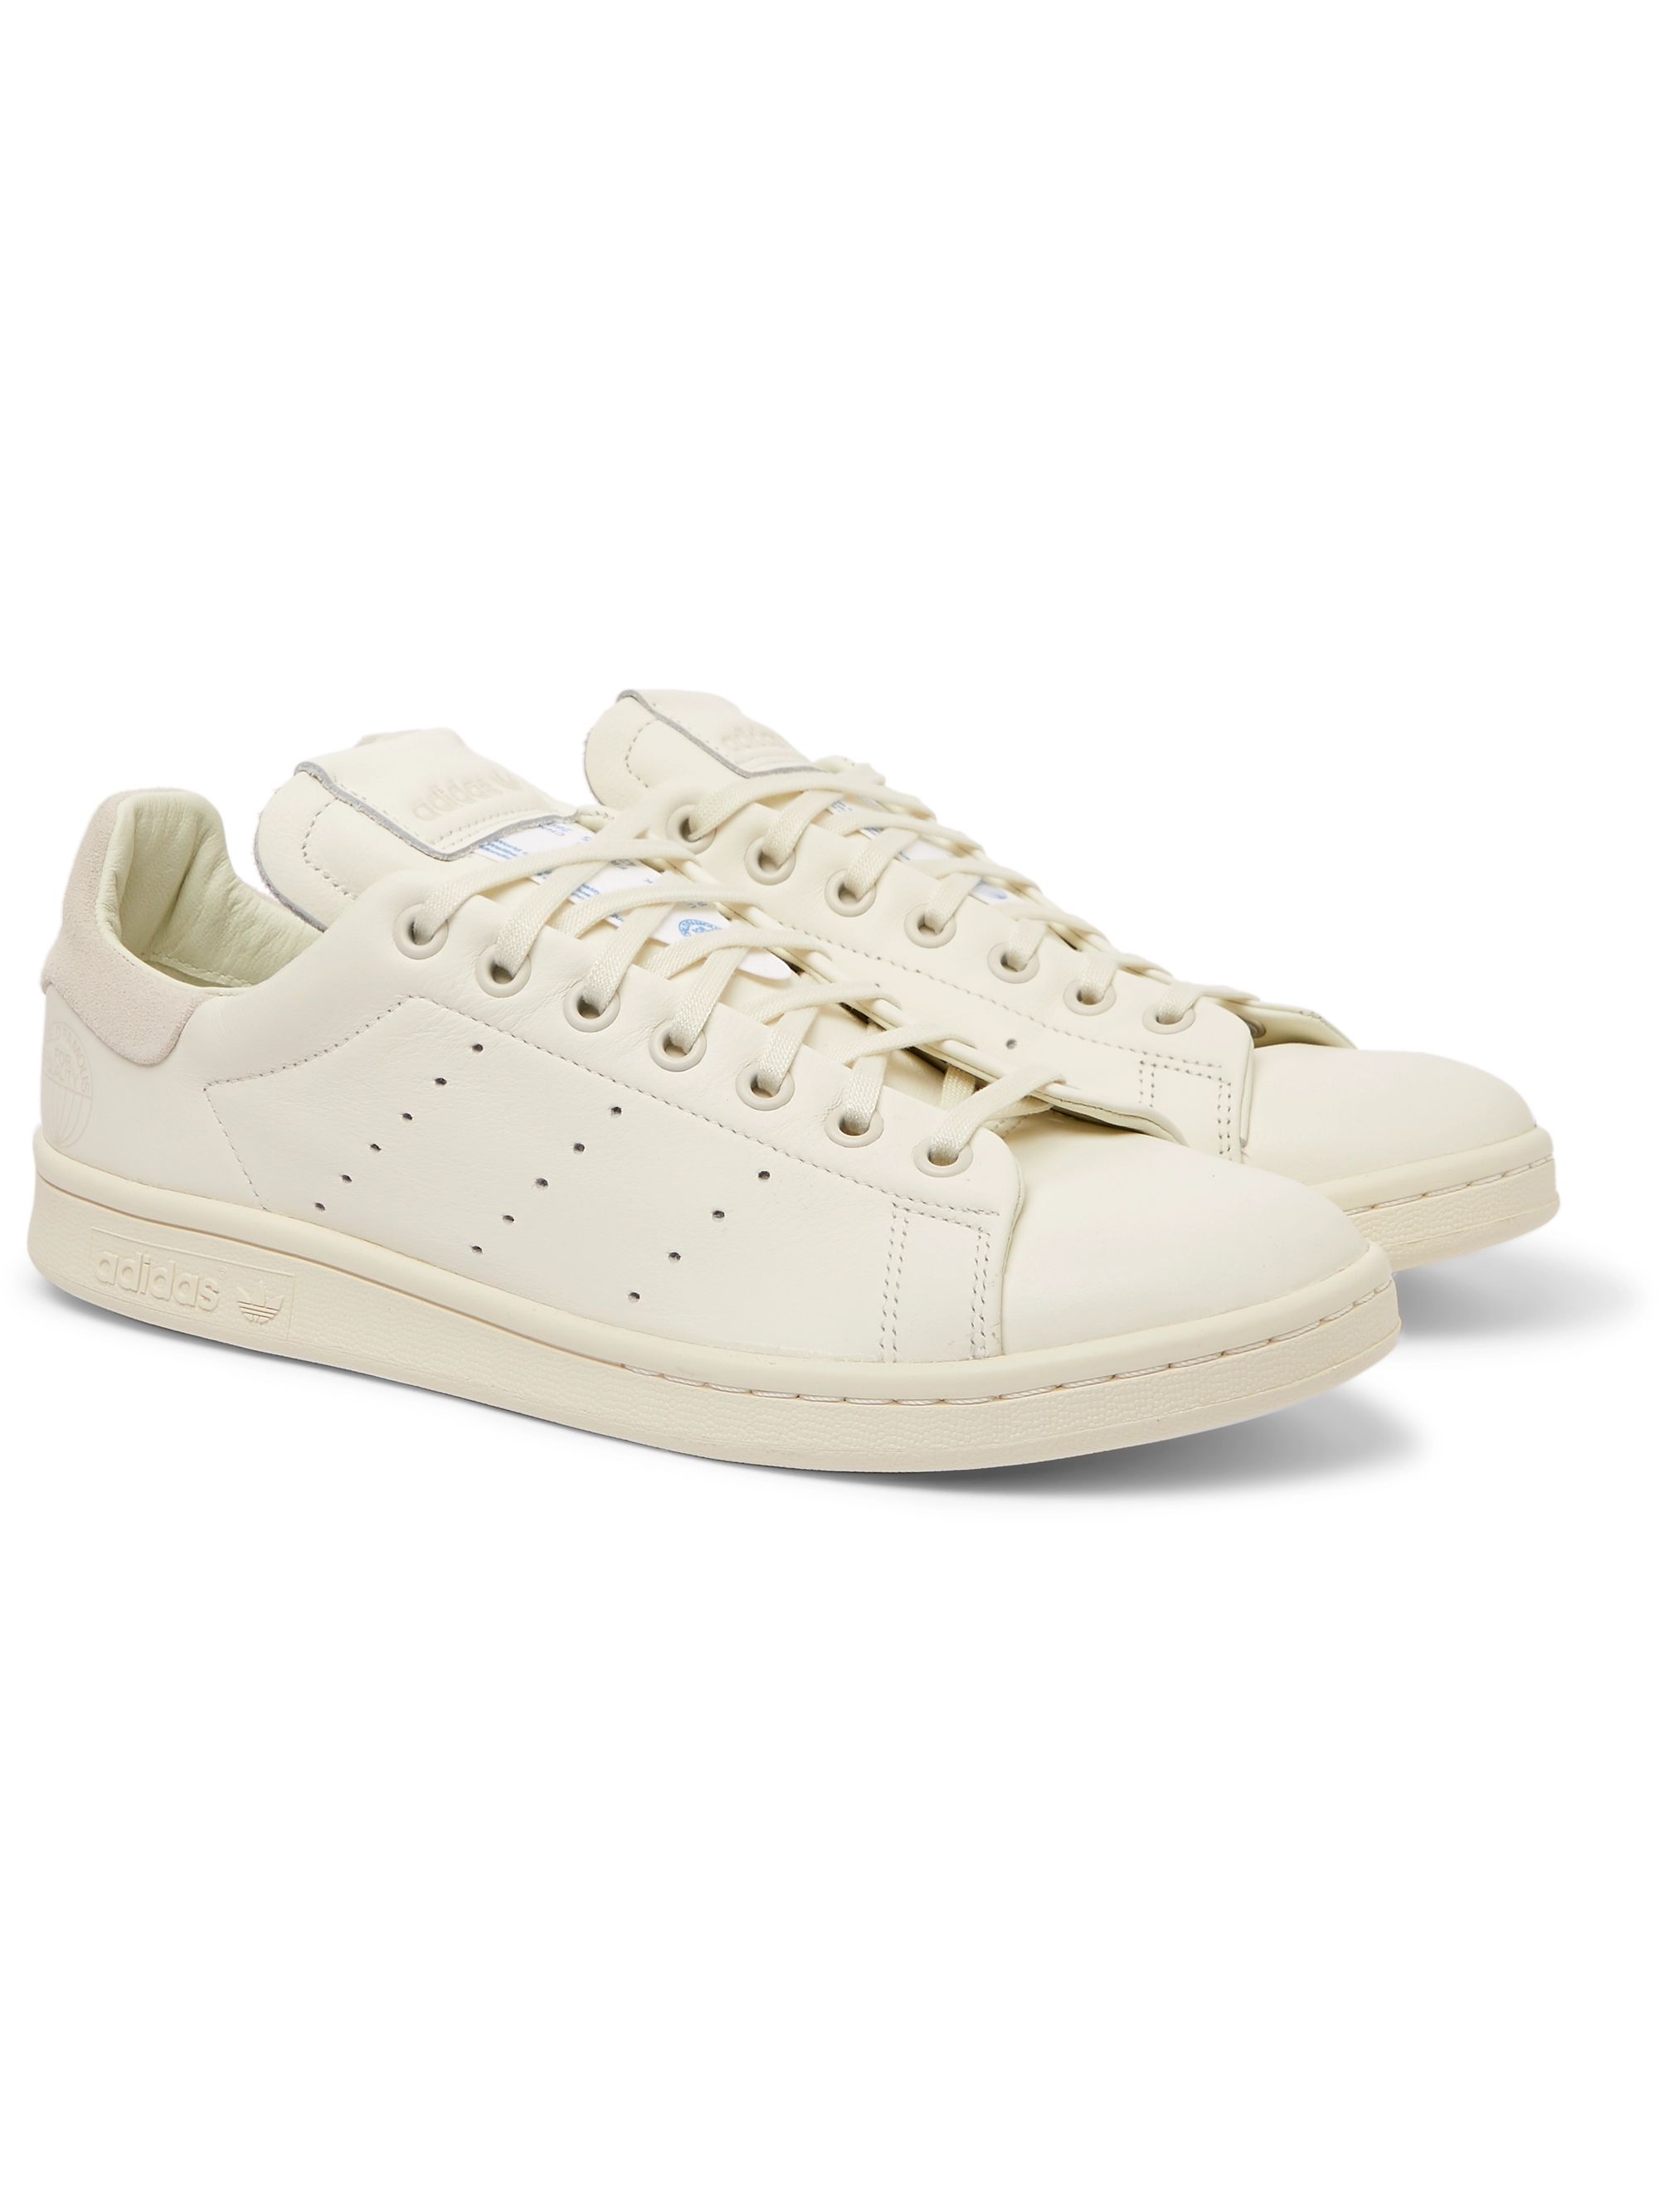 Suede-Trimmed Leather Sneakers 